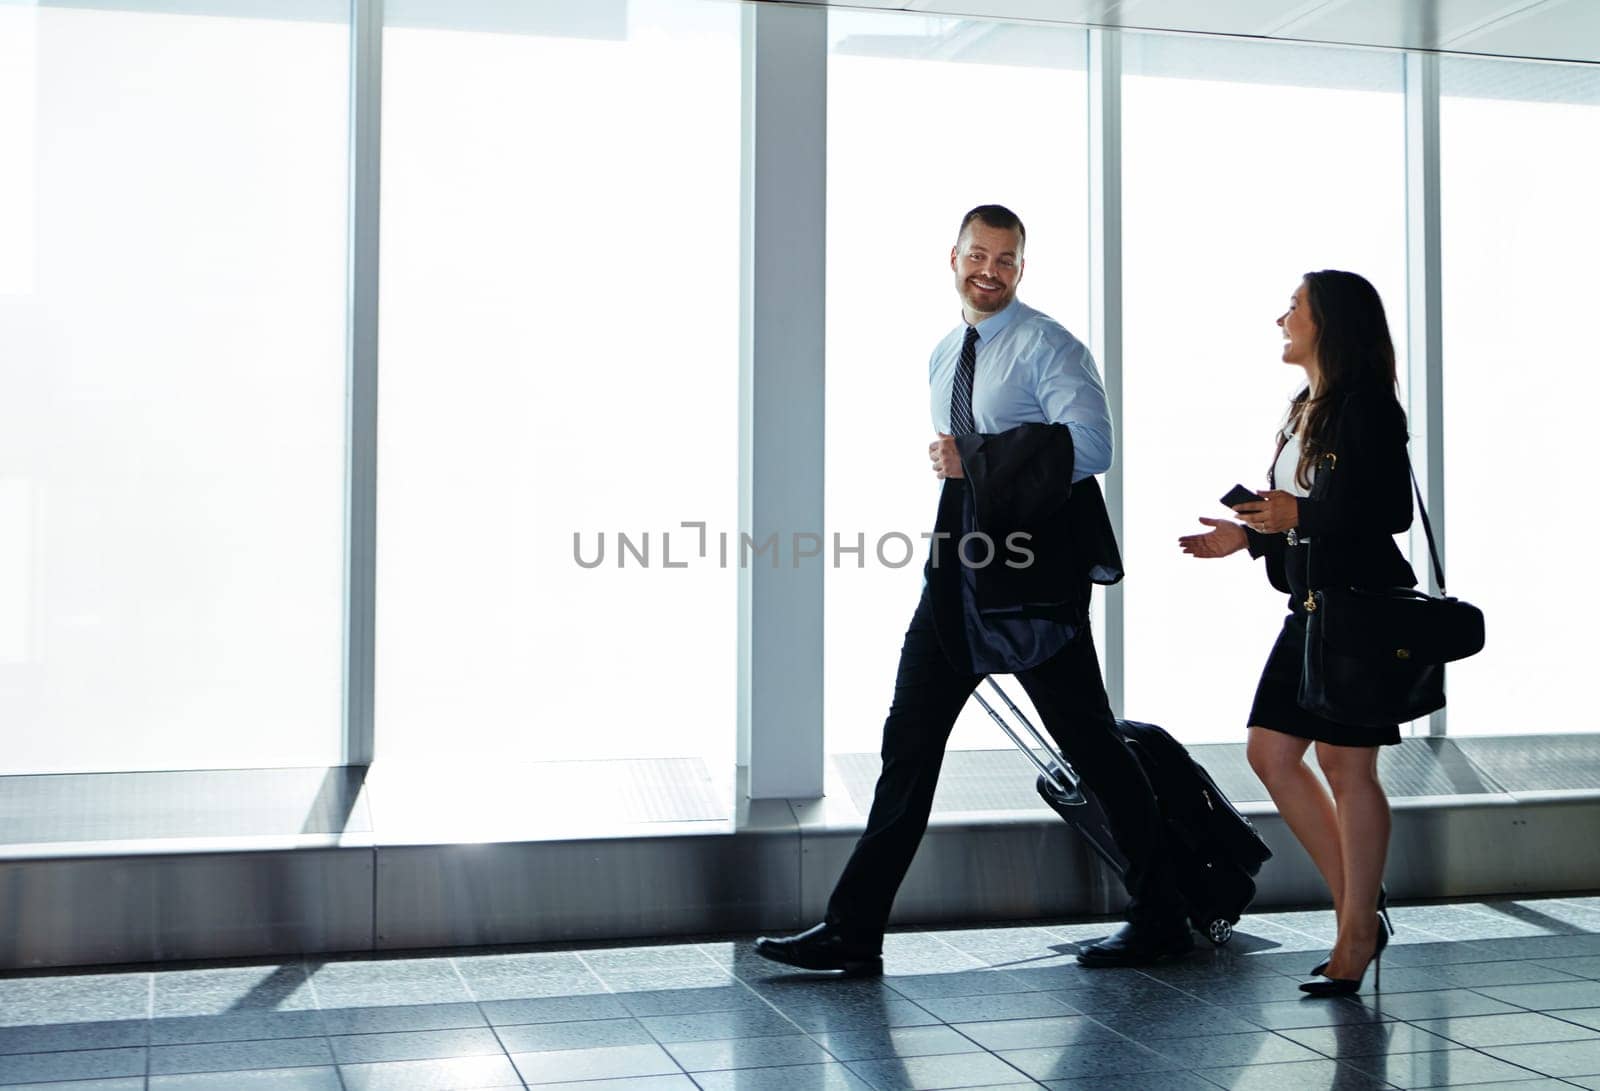 They make great business travel companions. two businesspeople talking together while walking through an airport